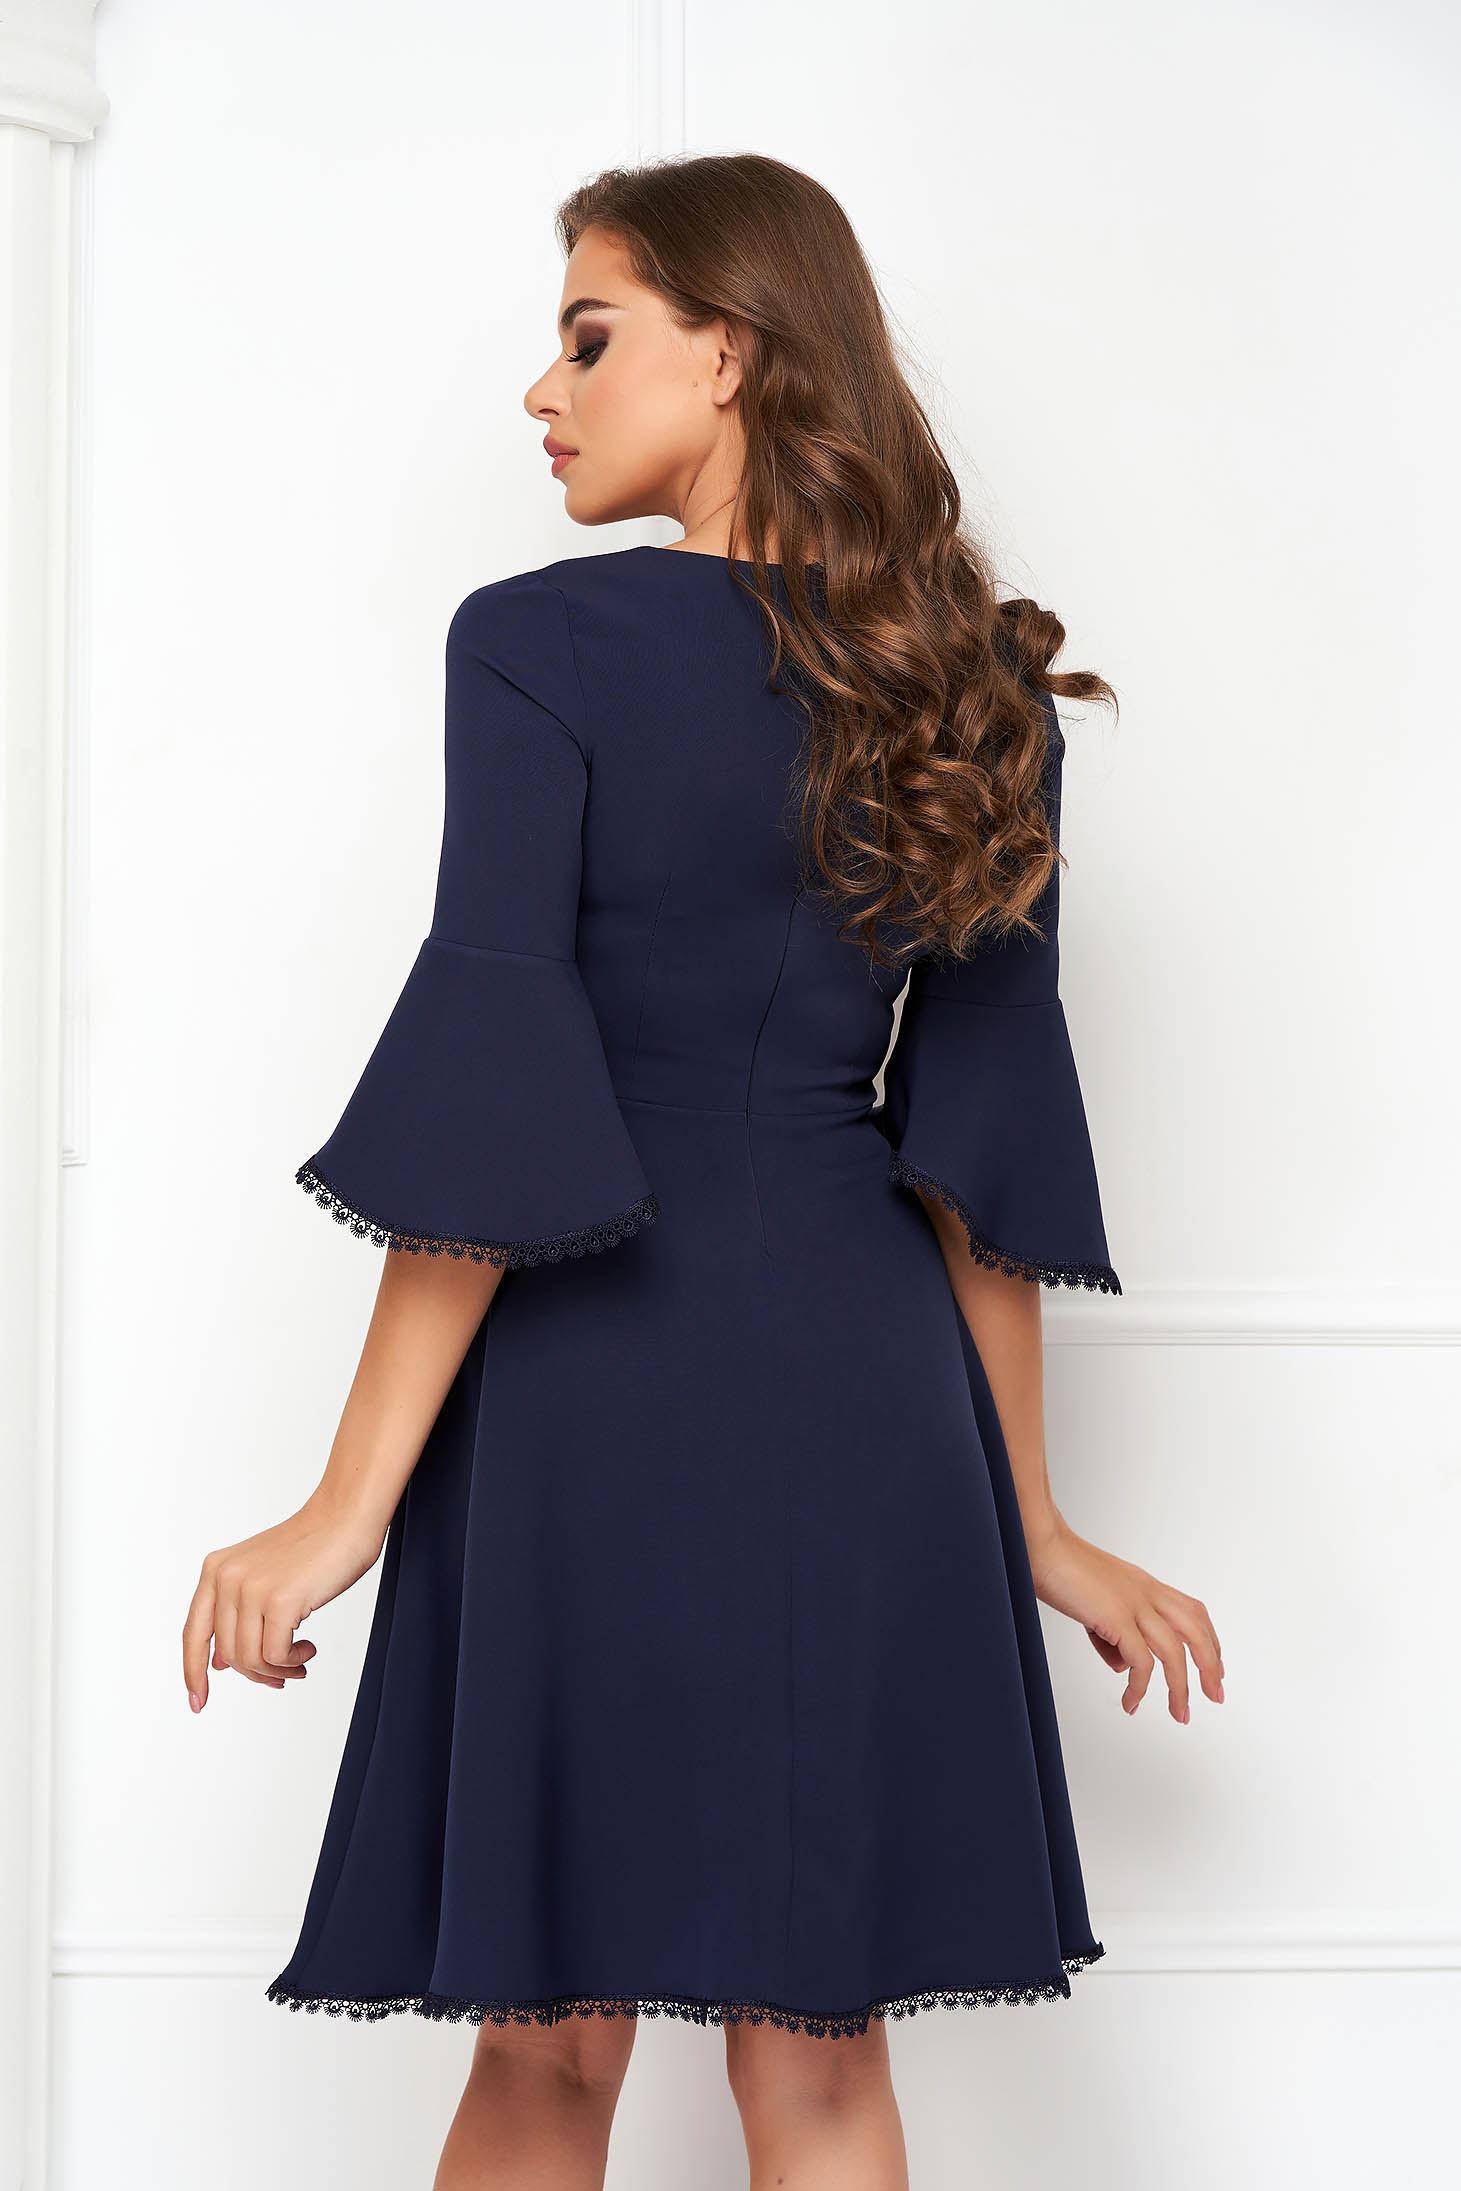 Navy Blue Elastic Fabric Dress in A-line with Ruffles on the Sleeve - StarShinerS 2 - StarShinerS.com